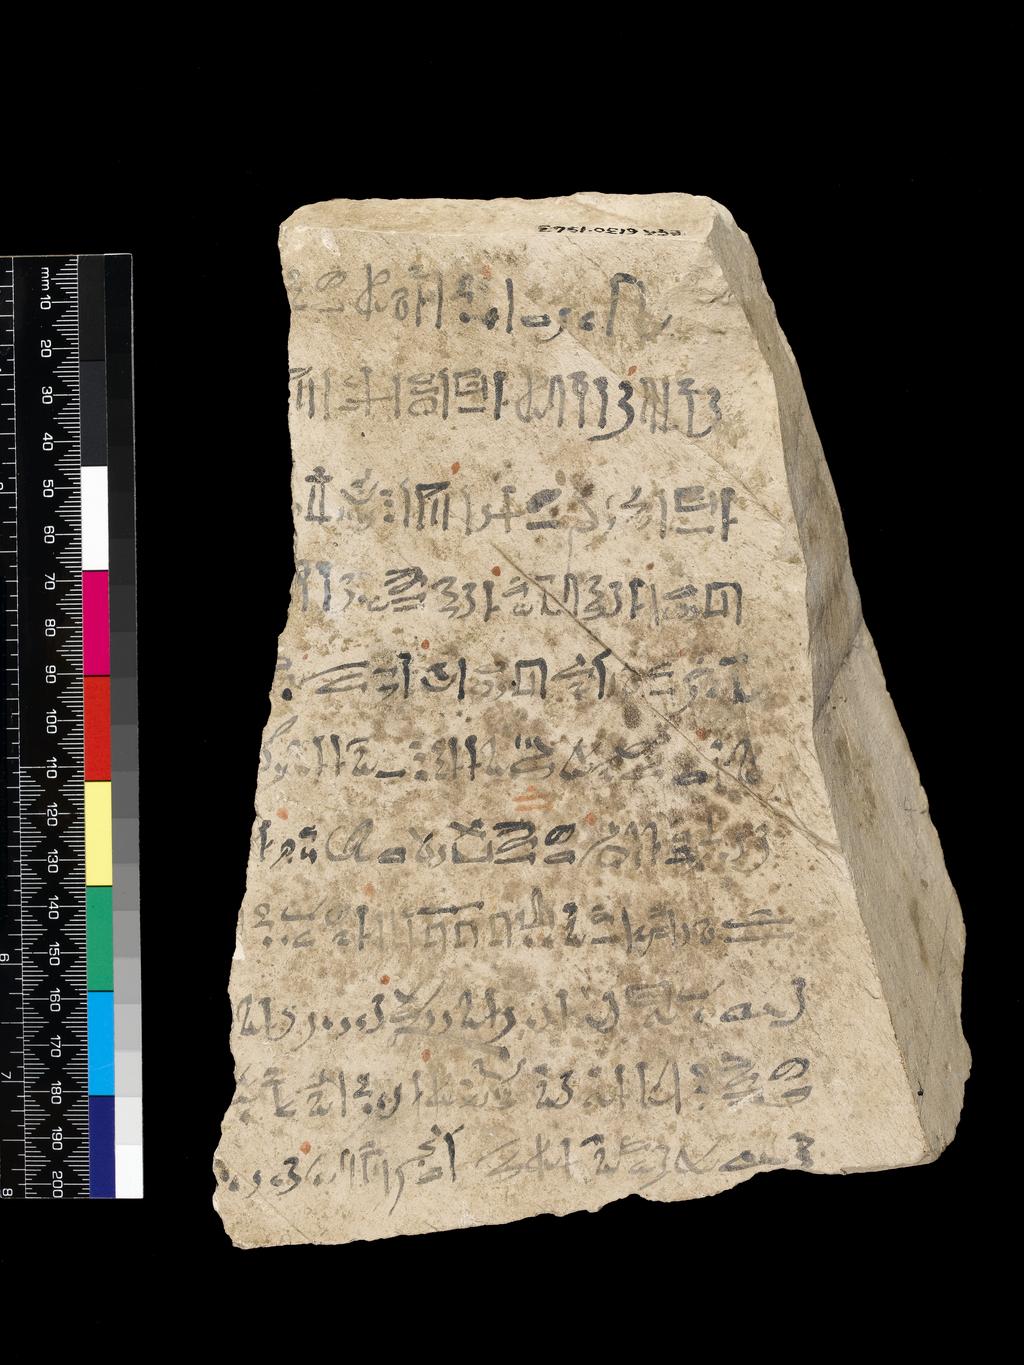 An image of Written Document. Ostracon, hieratic text, both sides, black and red ink. Production Place/Find Spot: Egypt. Limestone, length 0.156 m, width 0.209 m. New Kingdom.